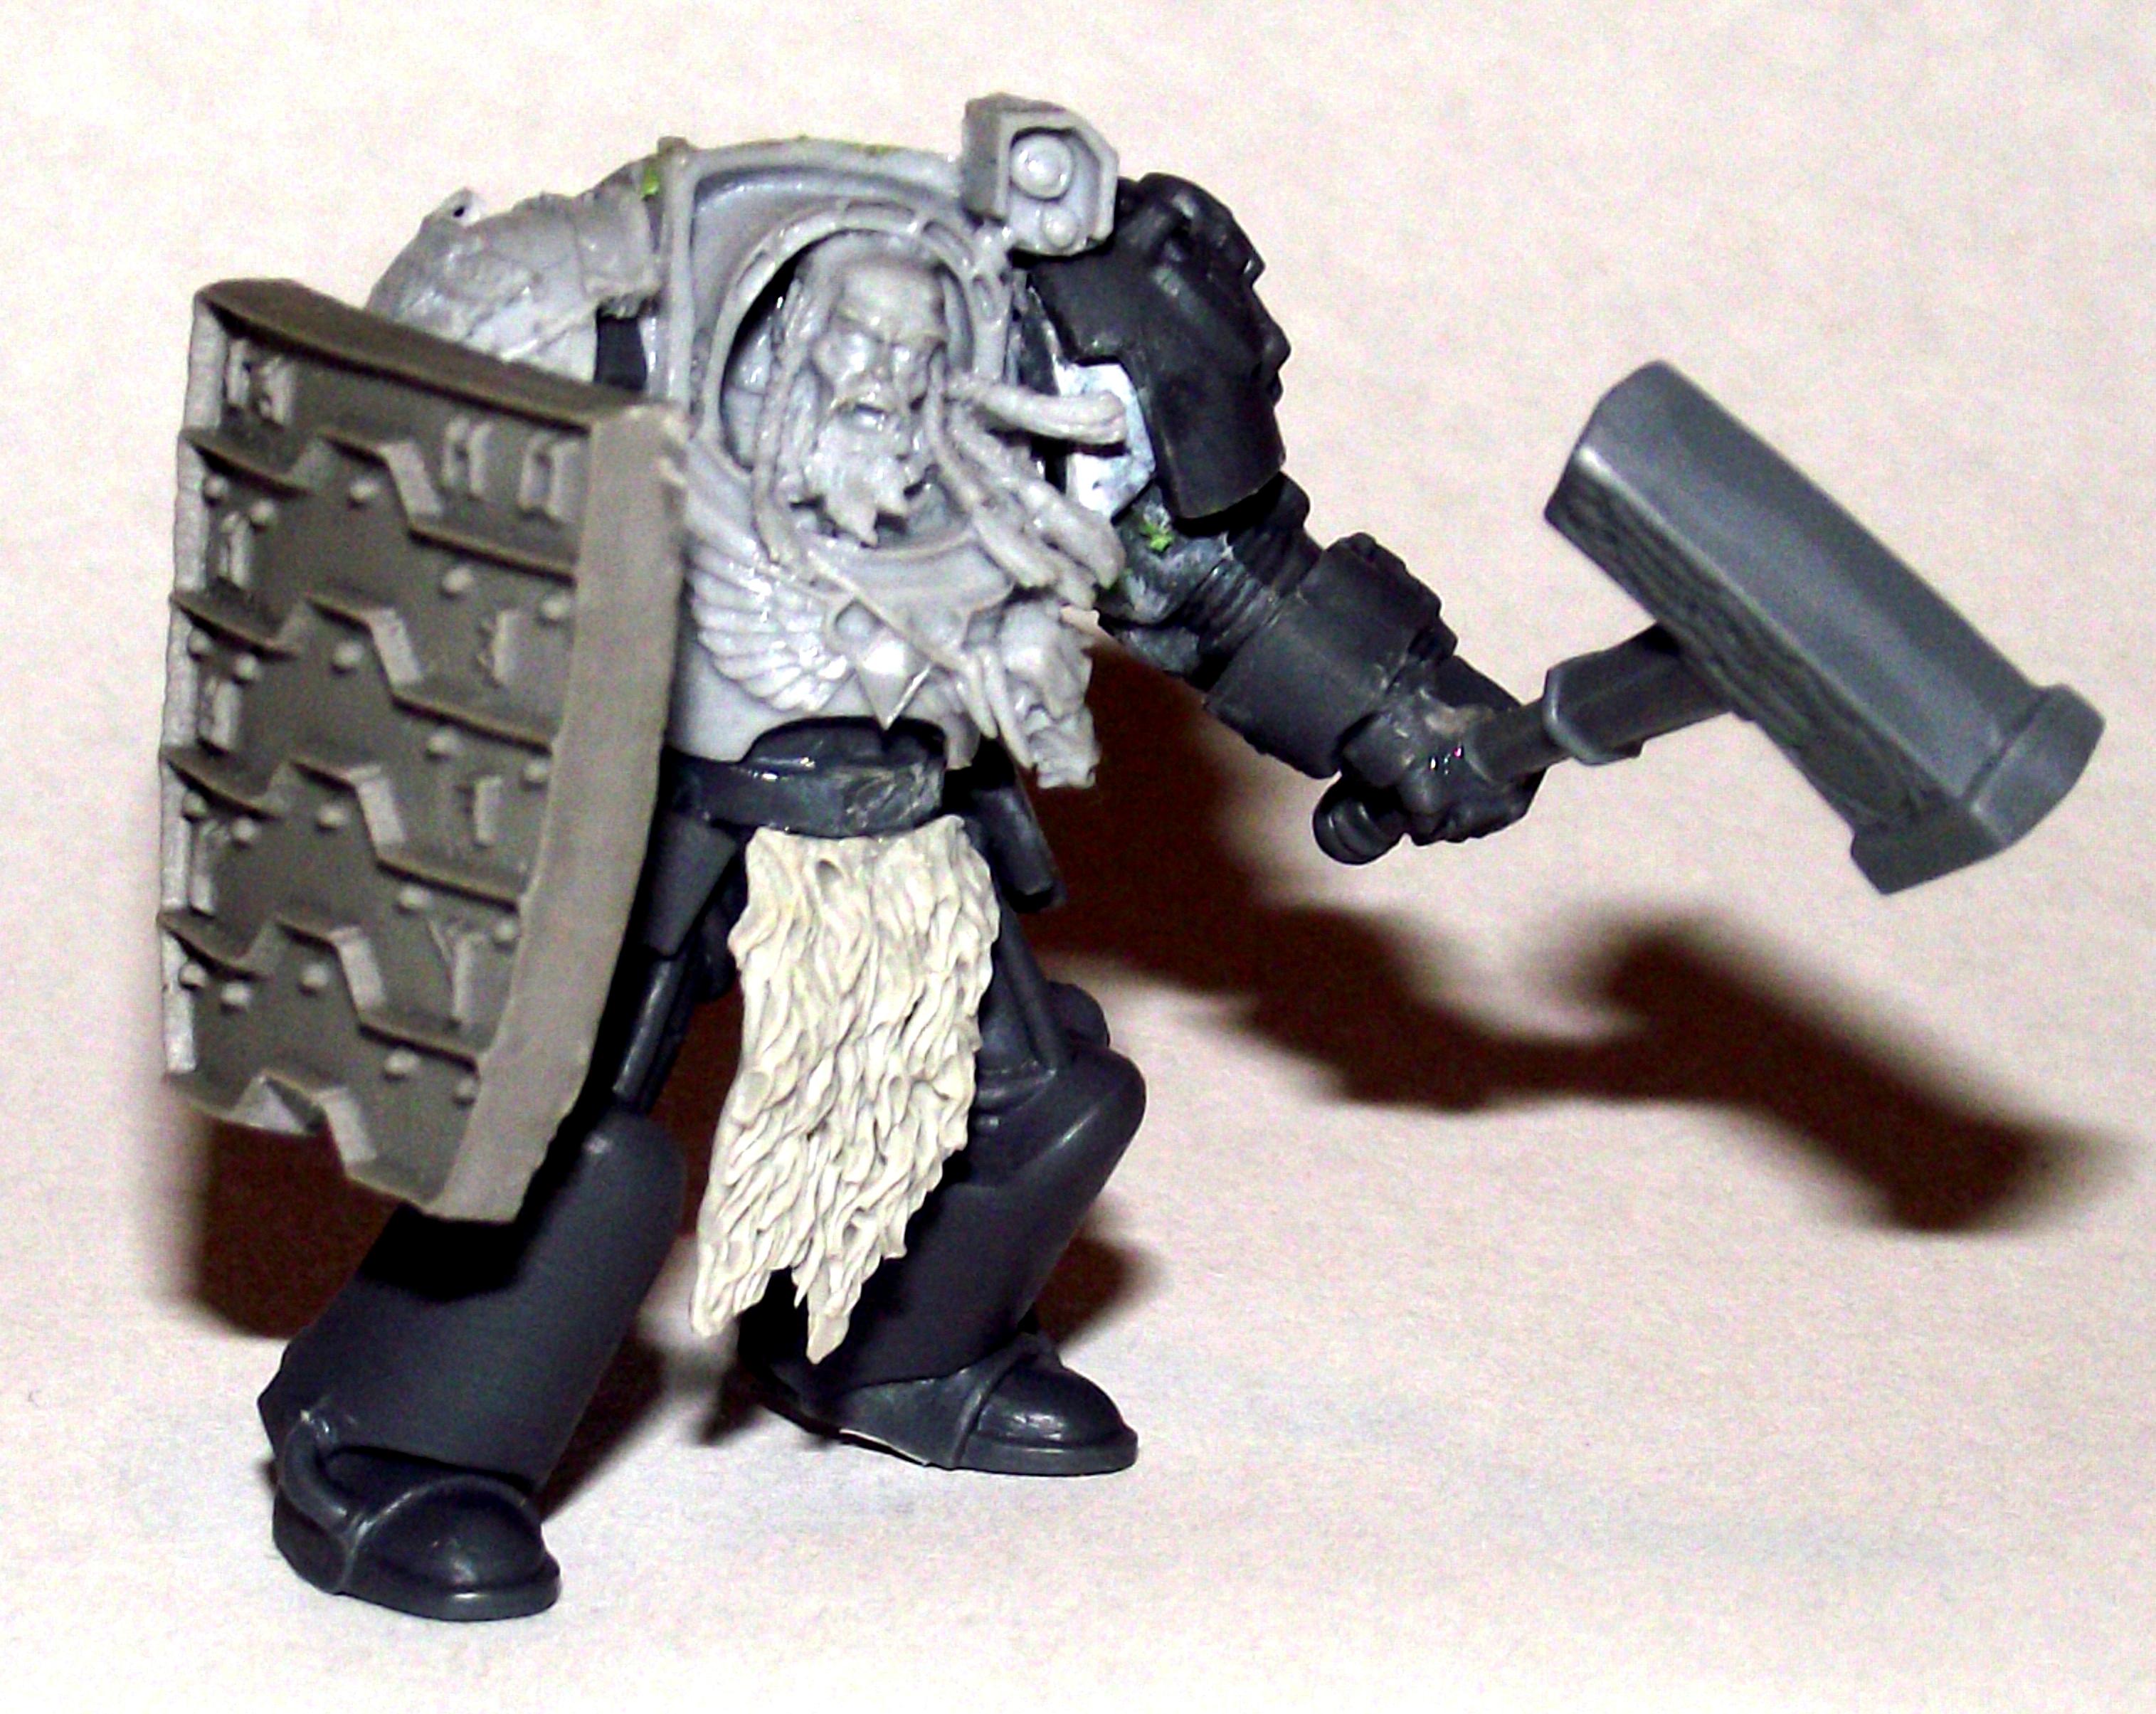 Arjac Rockfist, Forge World, Hitech, Space Wolves